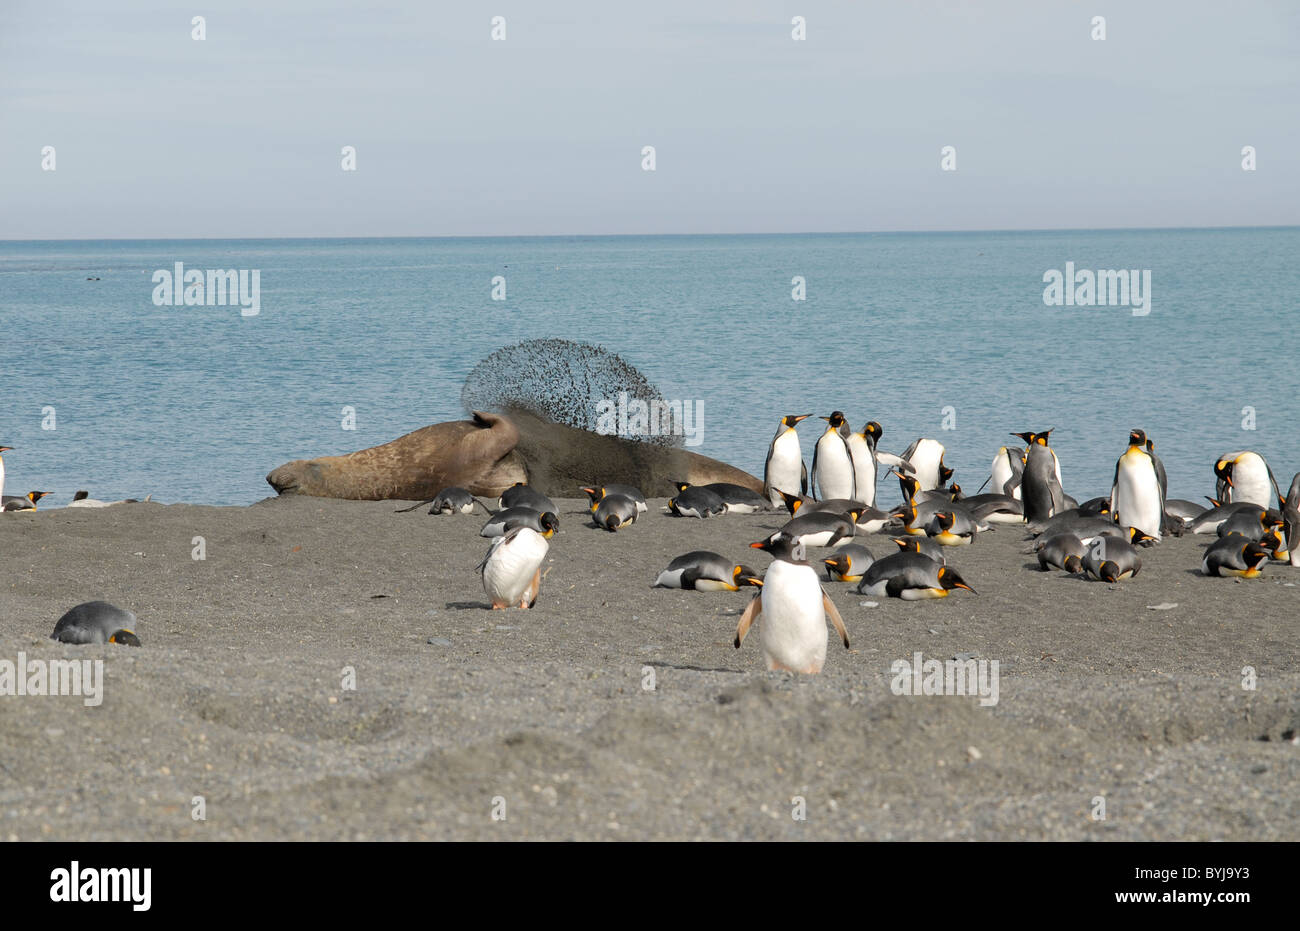 A male elephant seal (Mirounga leonina) in between King- and Gentoo Penguins, throwing sand on its back. Stock Photo